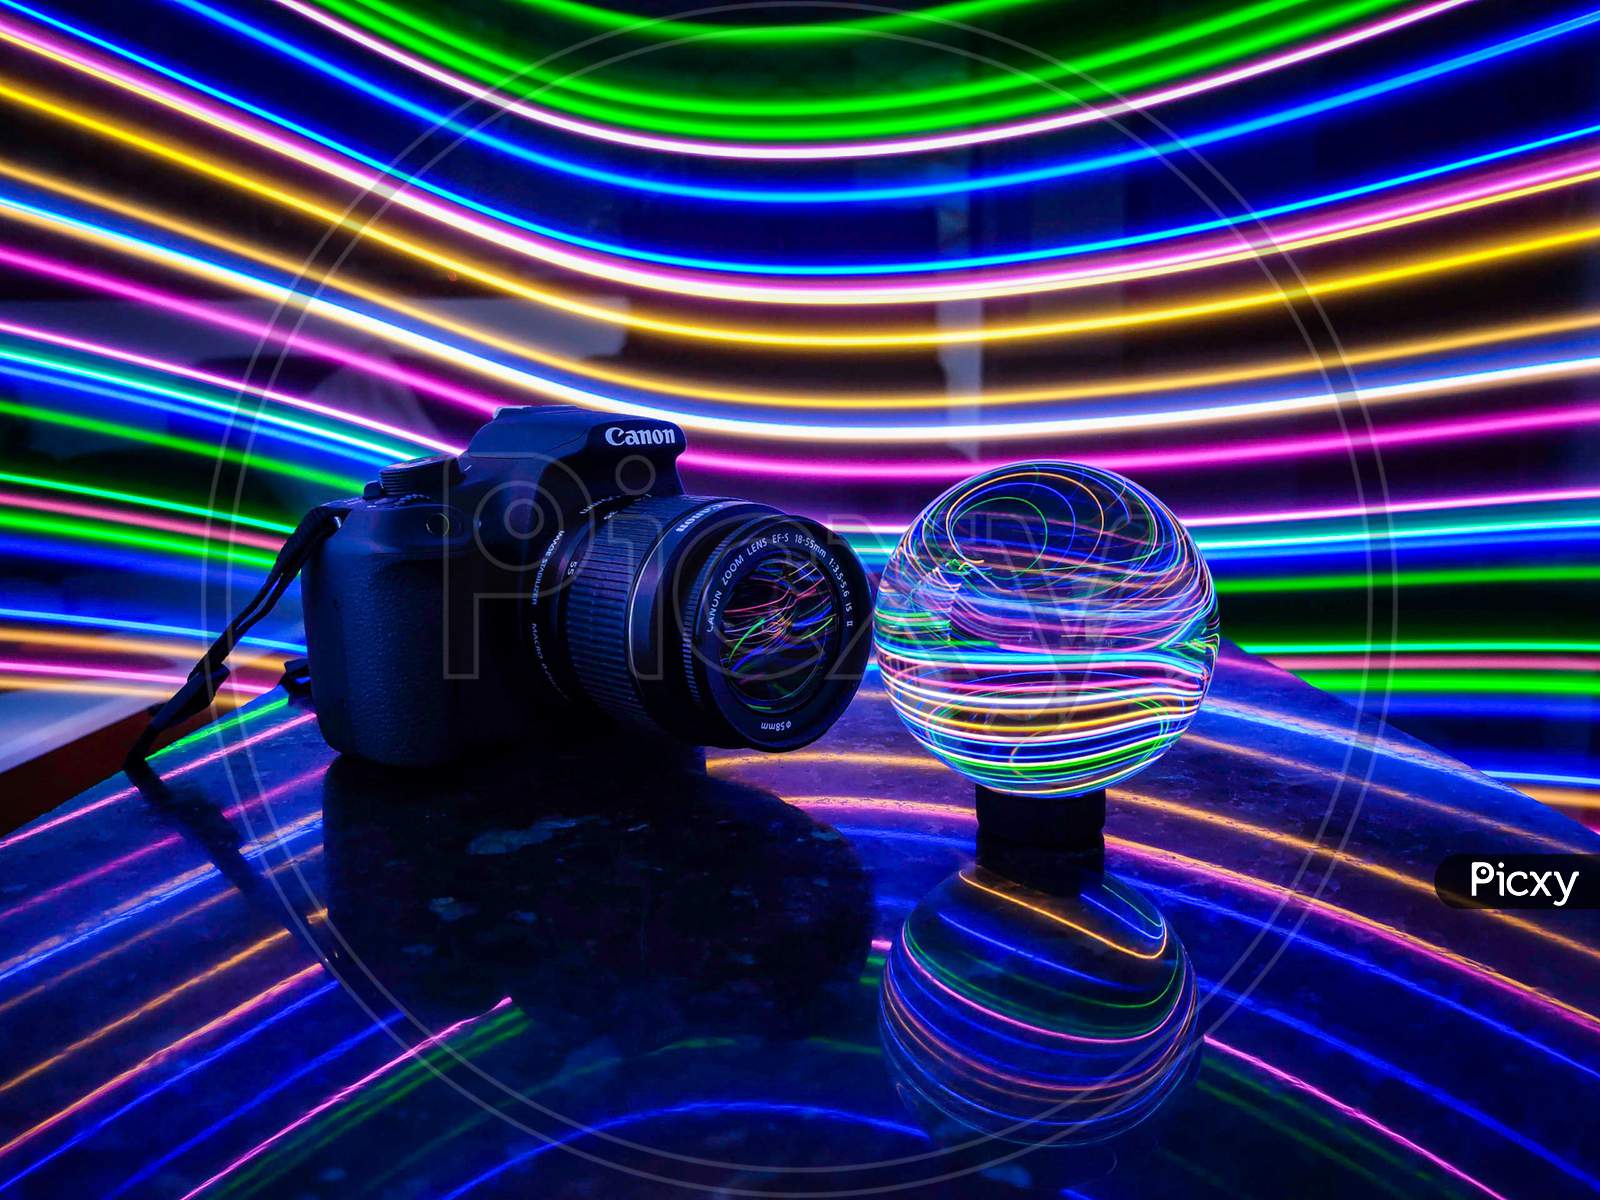 Canon camera with Lensball light painting photography